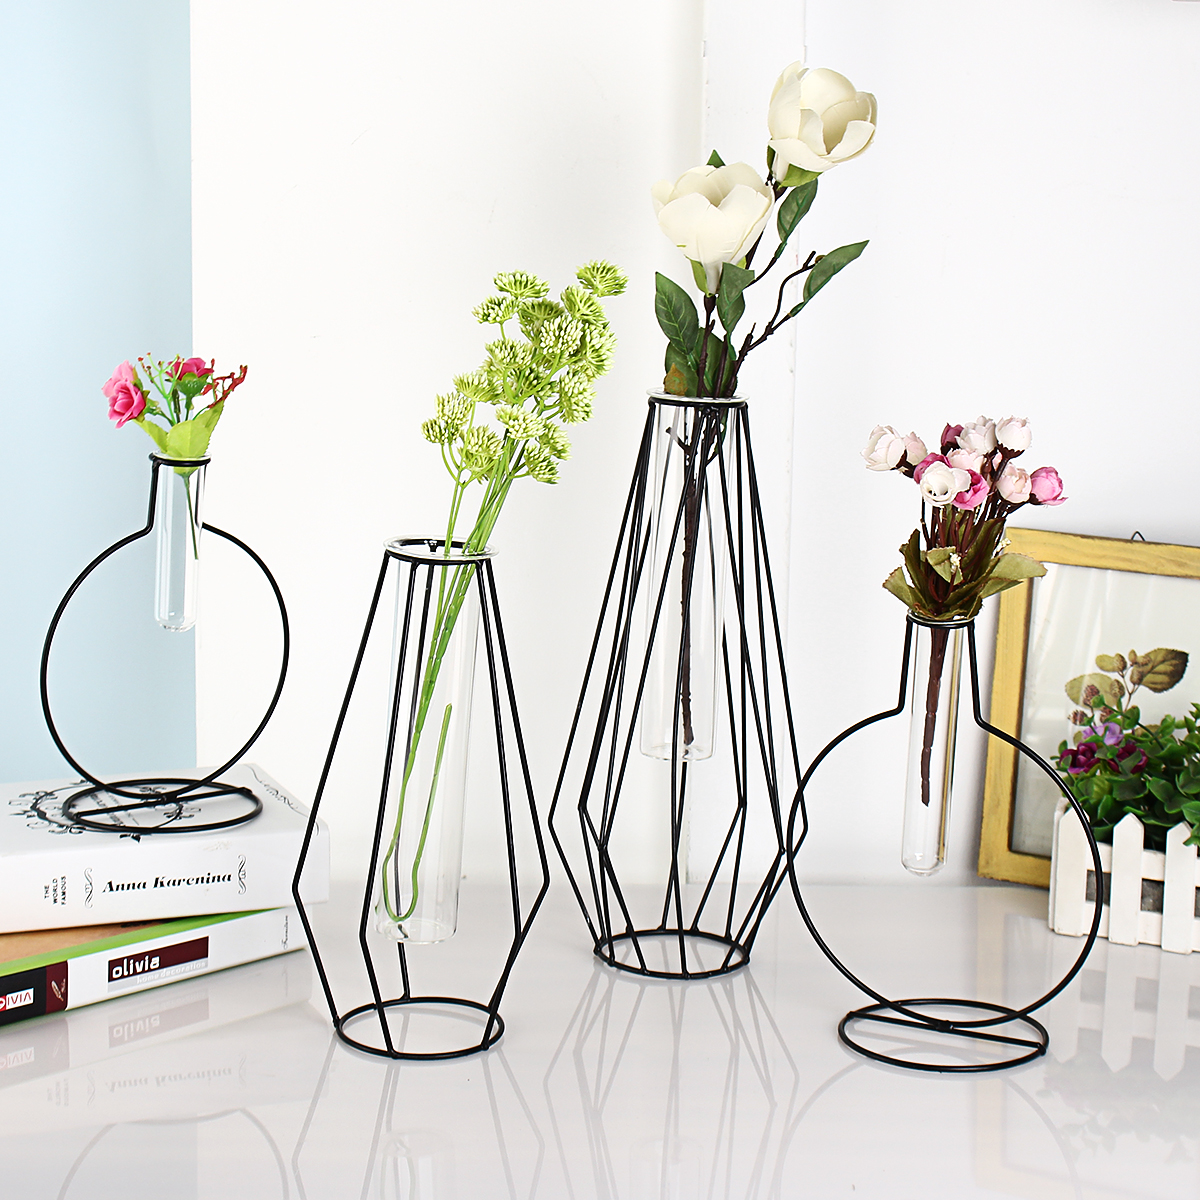 Flower-Vase-Holder-Plant-Display-with-Iron-Stand-and-Glass-Tube-for-Hydroponics-Ornament-Decorations-1447048-9